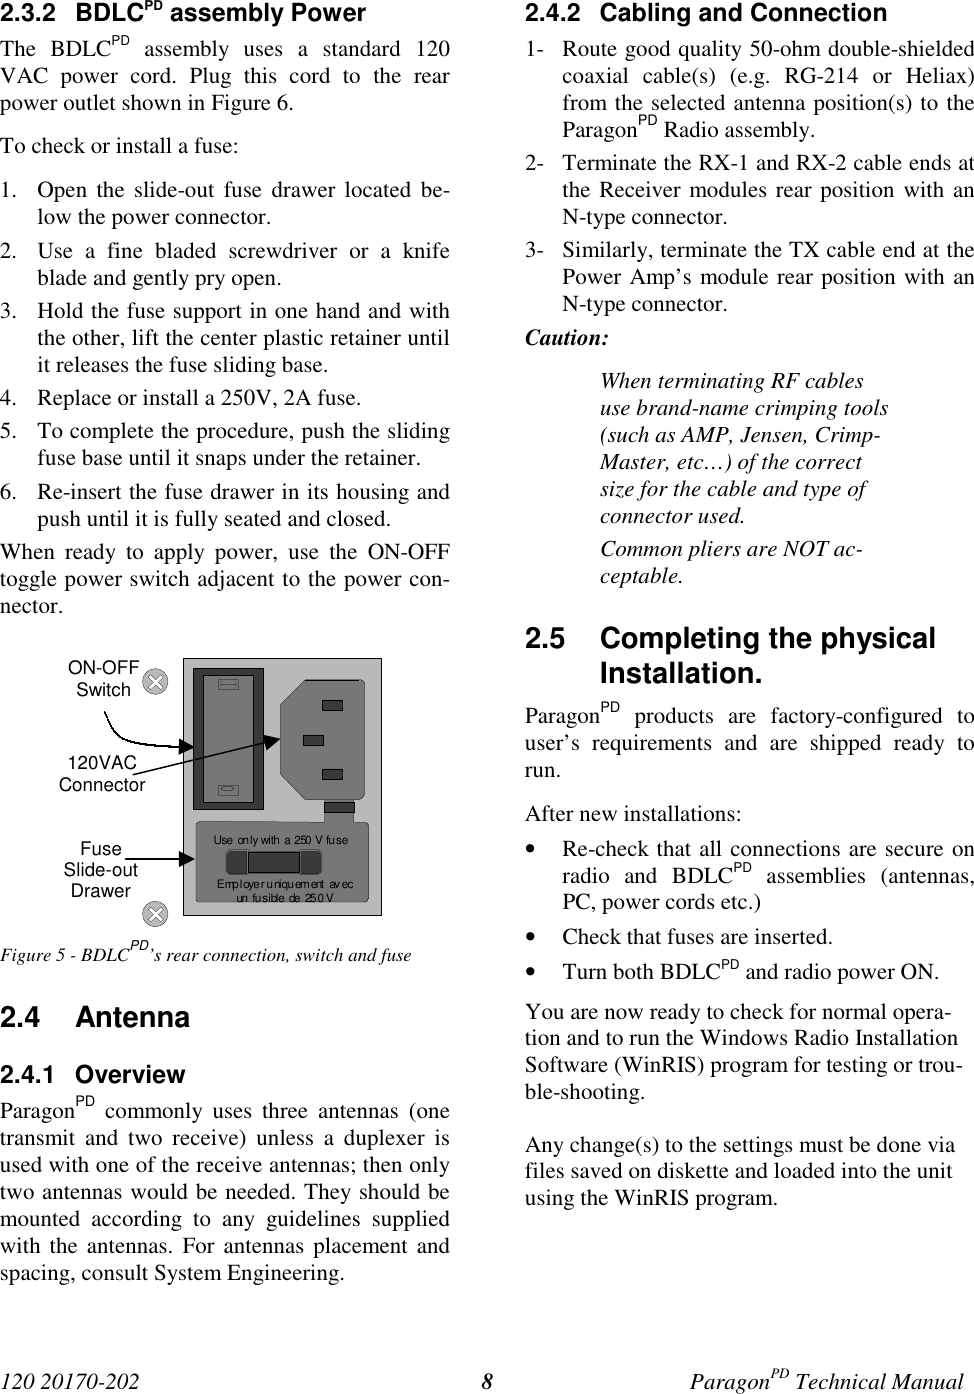 120 20170-202 ParagonPD Technical Manual82.3.2 BDLCPD assembly PowerThe BDLCPD assembly uses a standard 120VAC power cord. Plug this cord to the rearpower outlet shown in Figure 6.To check or install a fuse:1. Open the slide-out fuse drawer located be-low the power connector.2. Use a fine bladed screwdriver or a knifeblade and gently pry open.3. Hold the fuse support in one hand and withthe other, lift the center plastic retainer untilit releases the fuse sliding base.4. Replace or install a 250V, 2A fuse.5. To complete the procedure, push the slidingfuse base until it snaps under the retainer.6. Re-insert the fuse drawer in its housing andpush until it is fully seated and closed.When ready to apply power, use the ON-OFFtoggle power switch adjacent to the power con-nector.Figure 5 - BDLCPD’s rear connection, switch and fuse2.4 Antenna2.4.1 OverviewParagonPD commonly uses three antennas (onetransmit and two receive) unless a duplexer isused with one of the receive antennas; then onlytwo antennas would be needed. They should bemounted according to any guidelines suppliedwith the antennas. For antennas placement andspacing, consult System Engineering.2.4.2  Cabling and Connection1- Route good quality 50-ohm double-shieldedcoaxial cable(s) (e.g. RG-214 or Heliax)from the selected antenna position(s) to theParagonPD Radio assembly.2- Terminate the RX-1 and RX-2 cable ends atthe Receiver modules rear position with anN-type connector.3- Similarly, terminate the TX cable end at thePower Amp’s module rear position with anN-type connector.Caution:When terminating RF cablesuse brand-name crimping tools(such as AMP, Jensen, Crimp-Master, etc…) of the correctsize for the cable and type ofconnector used.Common pliers are NOT ac-ceptable.2.5  Completing the physicalInstallation.ParagonPD products are factory-configured touser’s requirements and are shipped ready torun.After new installations:• Re-check that all connections are secure onradio and BDLCPD assemblies (antennas,PC, power cords etc.)• Check that fuses are inserted.• Turn both BDLCPD and radio power ON.You are now ready to check for normal opera-tion and to run the Windows Radio InstallationSoftware (WinRIS) program for testing or trou-ble-shooting.Any change(s) to the settings must be done viafiles saved on diskette and loaded into the unitusing the WinRIS program.Employer uniquement  avecun  fu s ible  de  25 0 VUse only with  a  250 V fu seON-OFFSwitch120VACConnectorFuseSlide-outDrawer